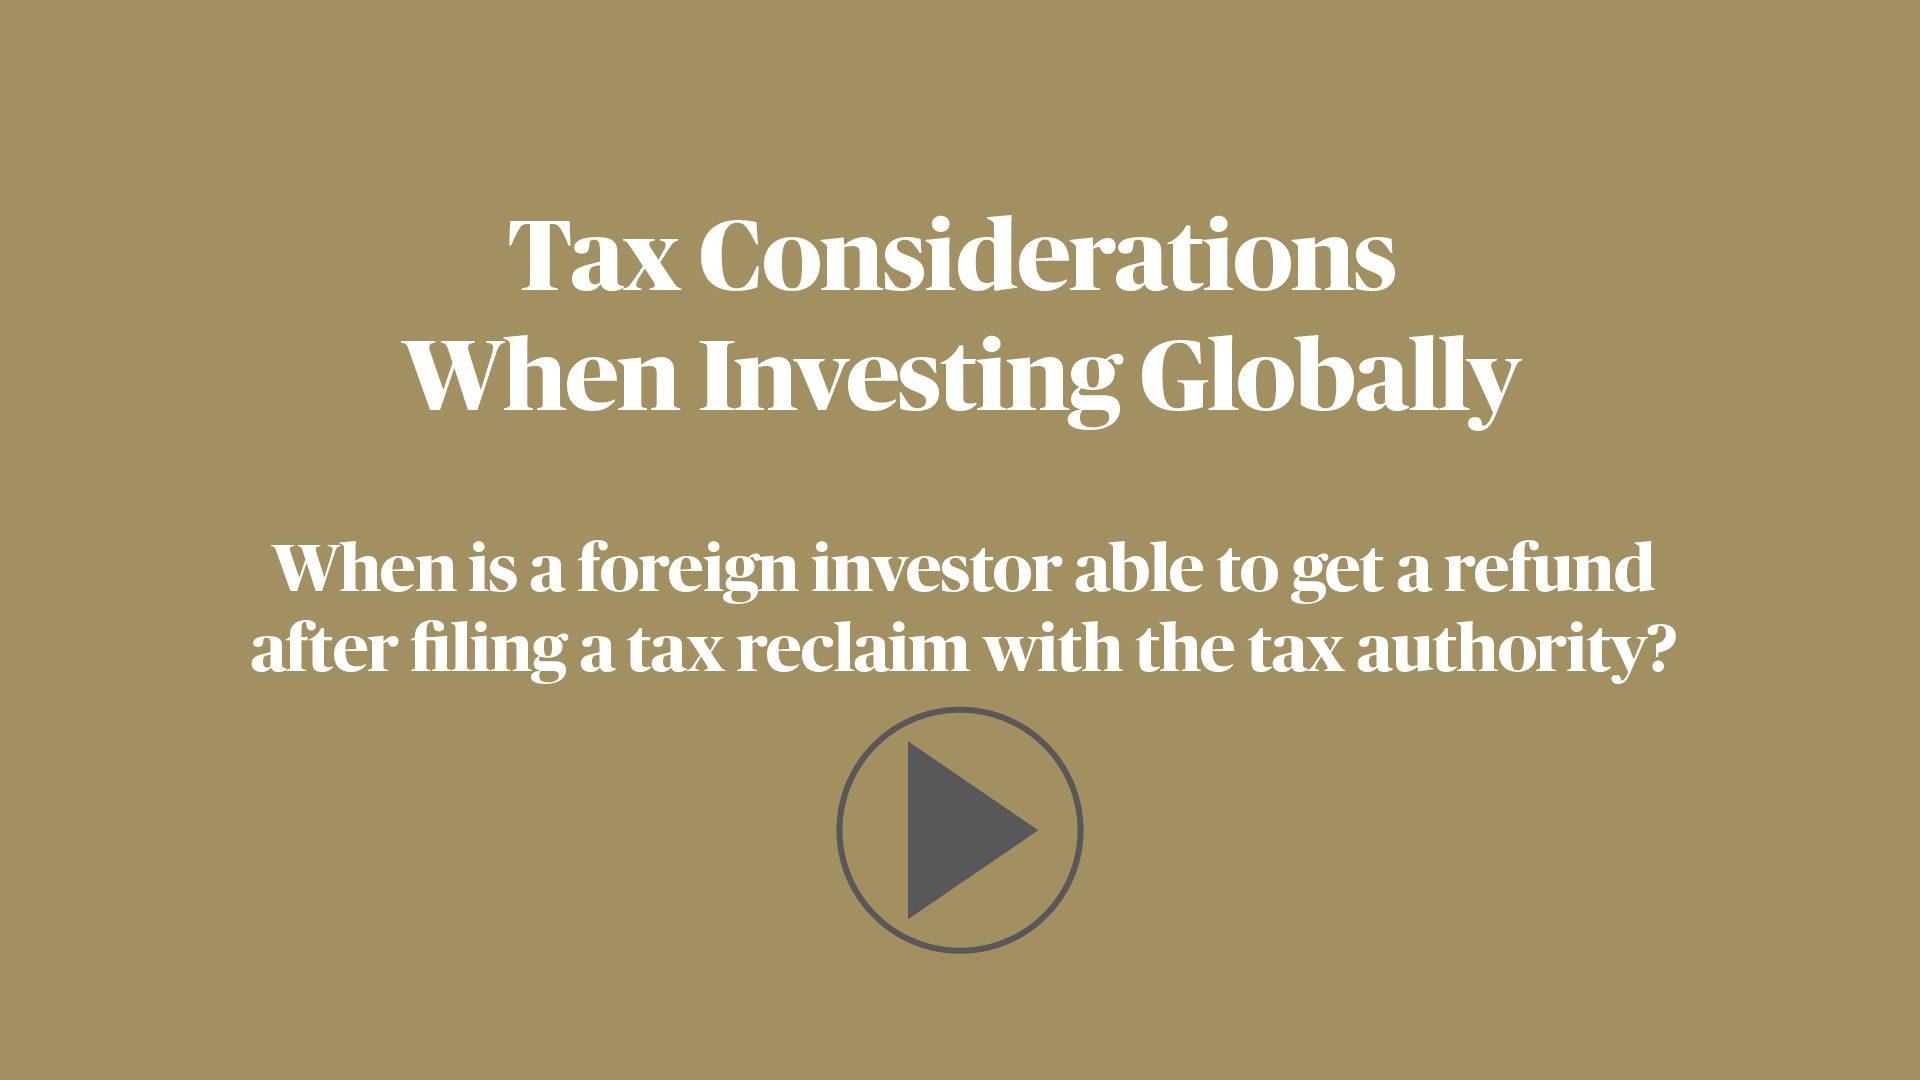 When is a foreign investor able to get a refund after filing a tax reclaim with the tax authority?